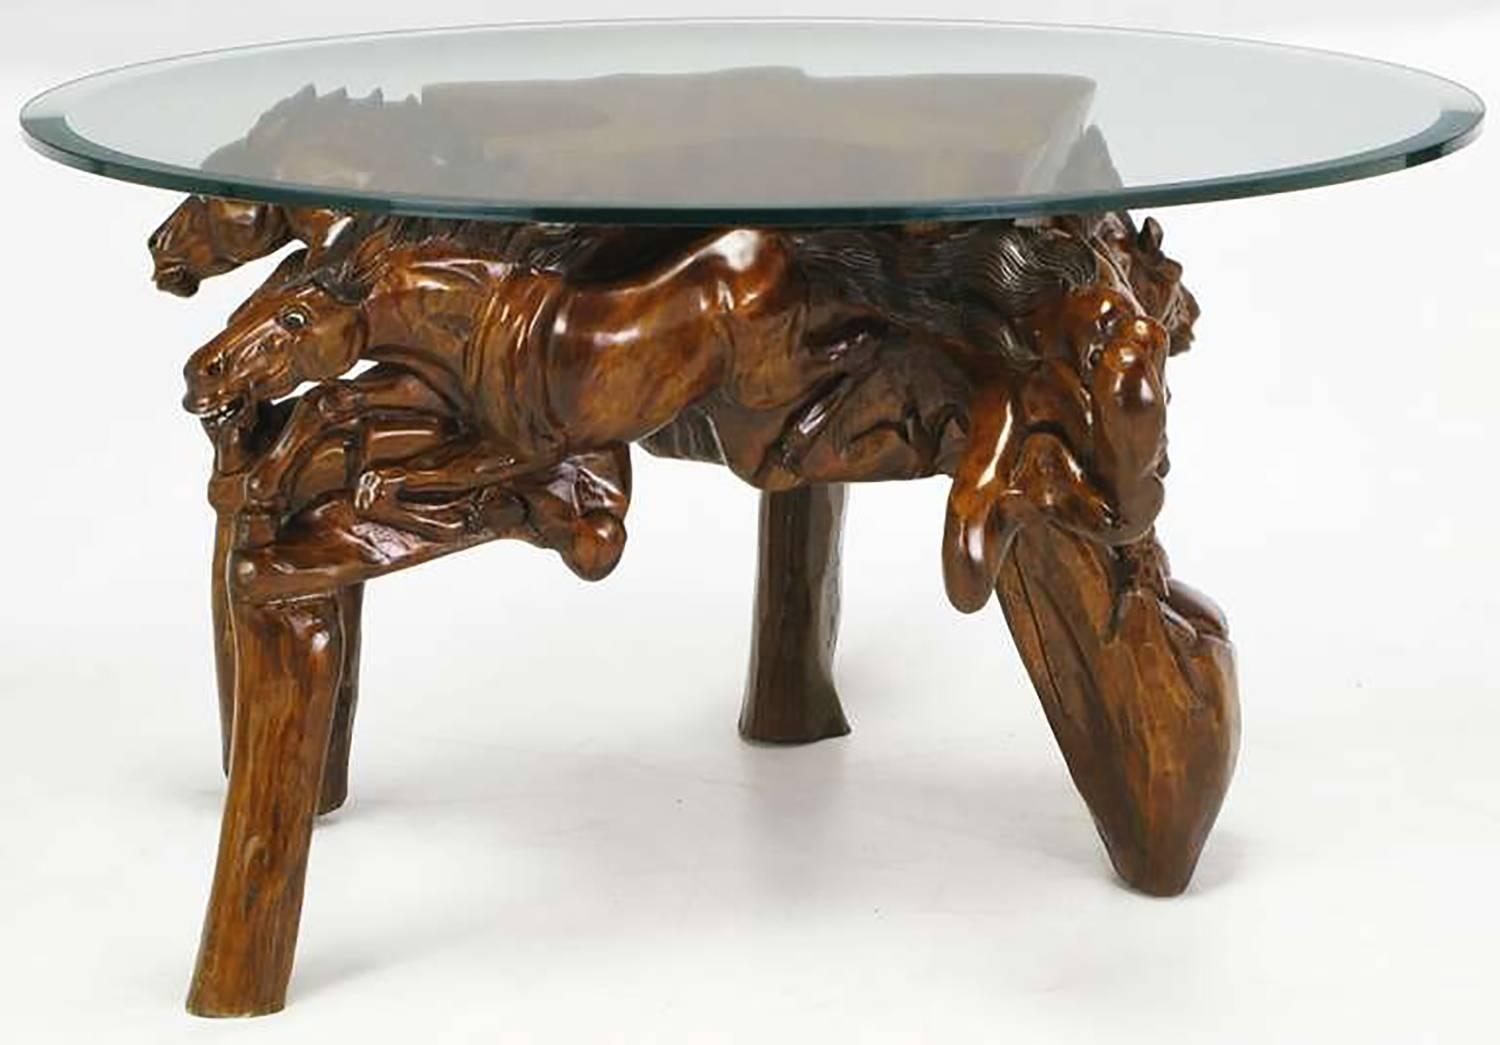 Expertly crafted work of art, this coffee table is hand-carved from wood, stained and burnished, then polished. Galloping horses appear to be coming from the centre of the table base. Legs are carved to resemble wood posts. Glass top is beveled and